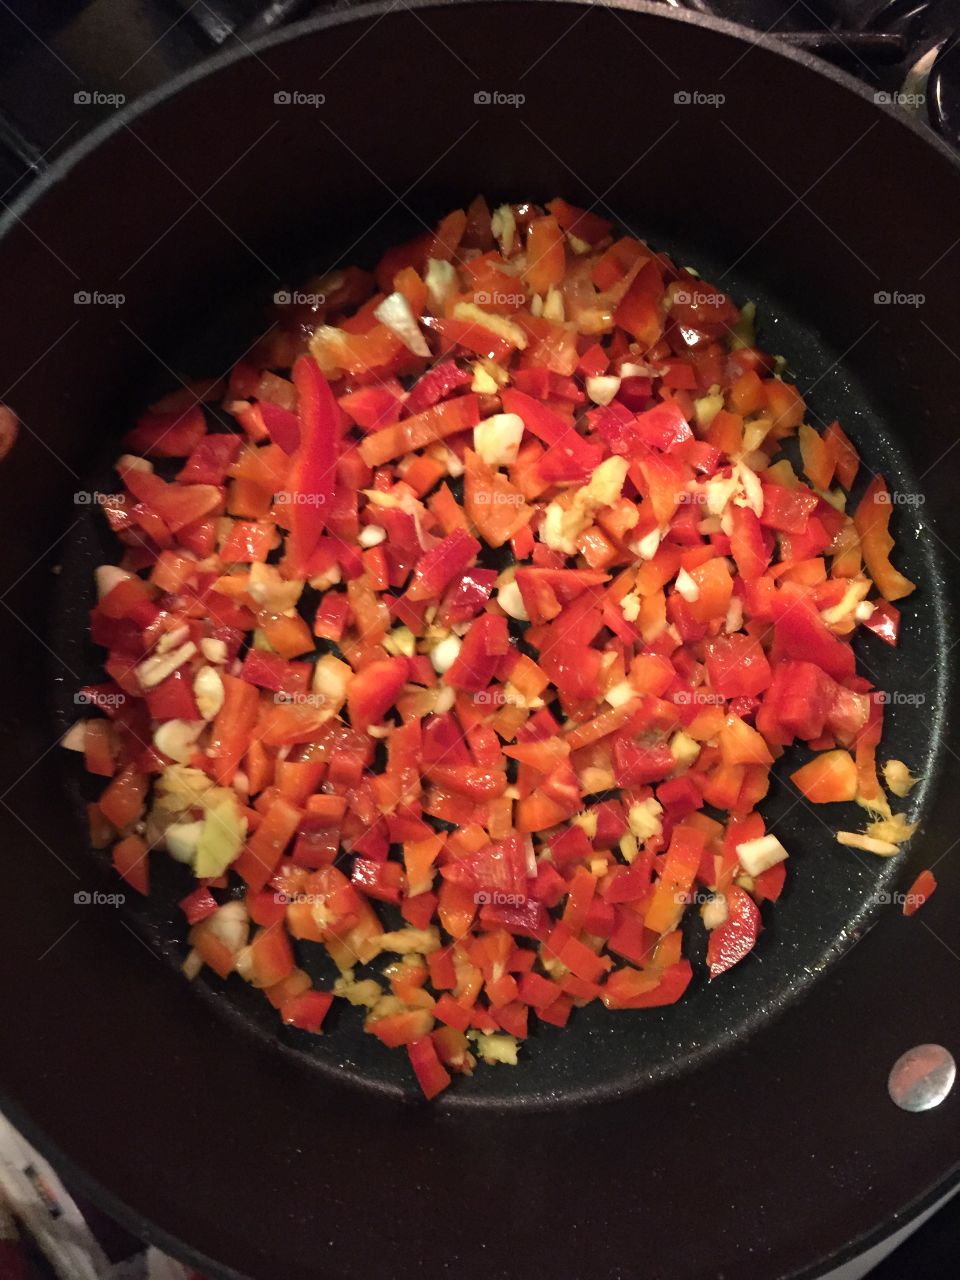 Chopped peppers in the pan